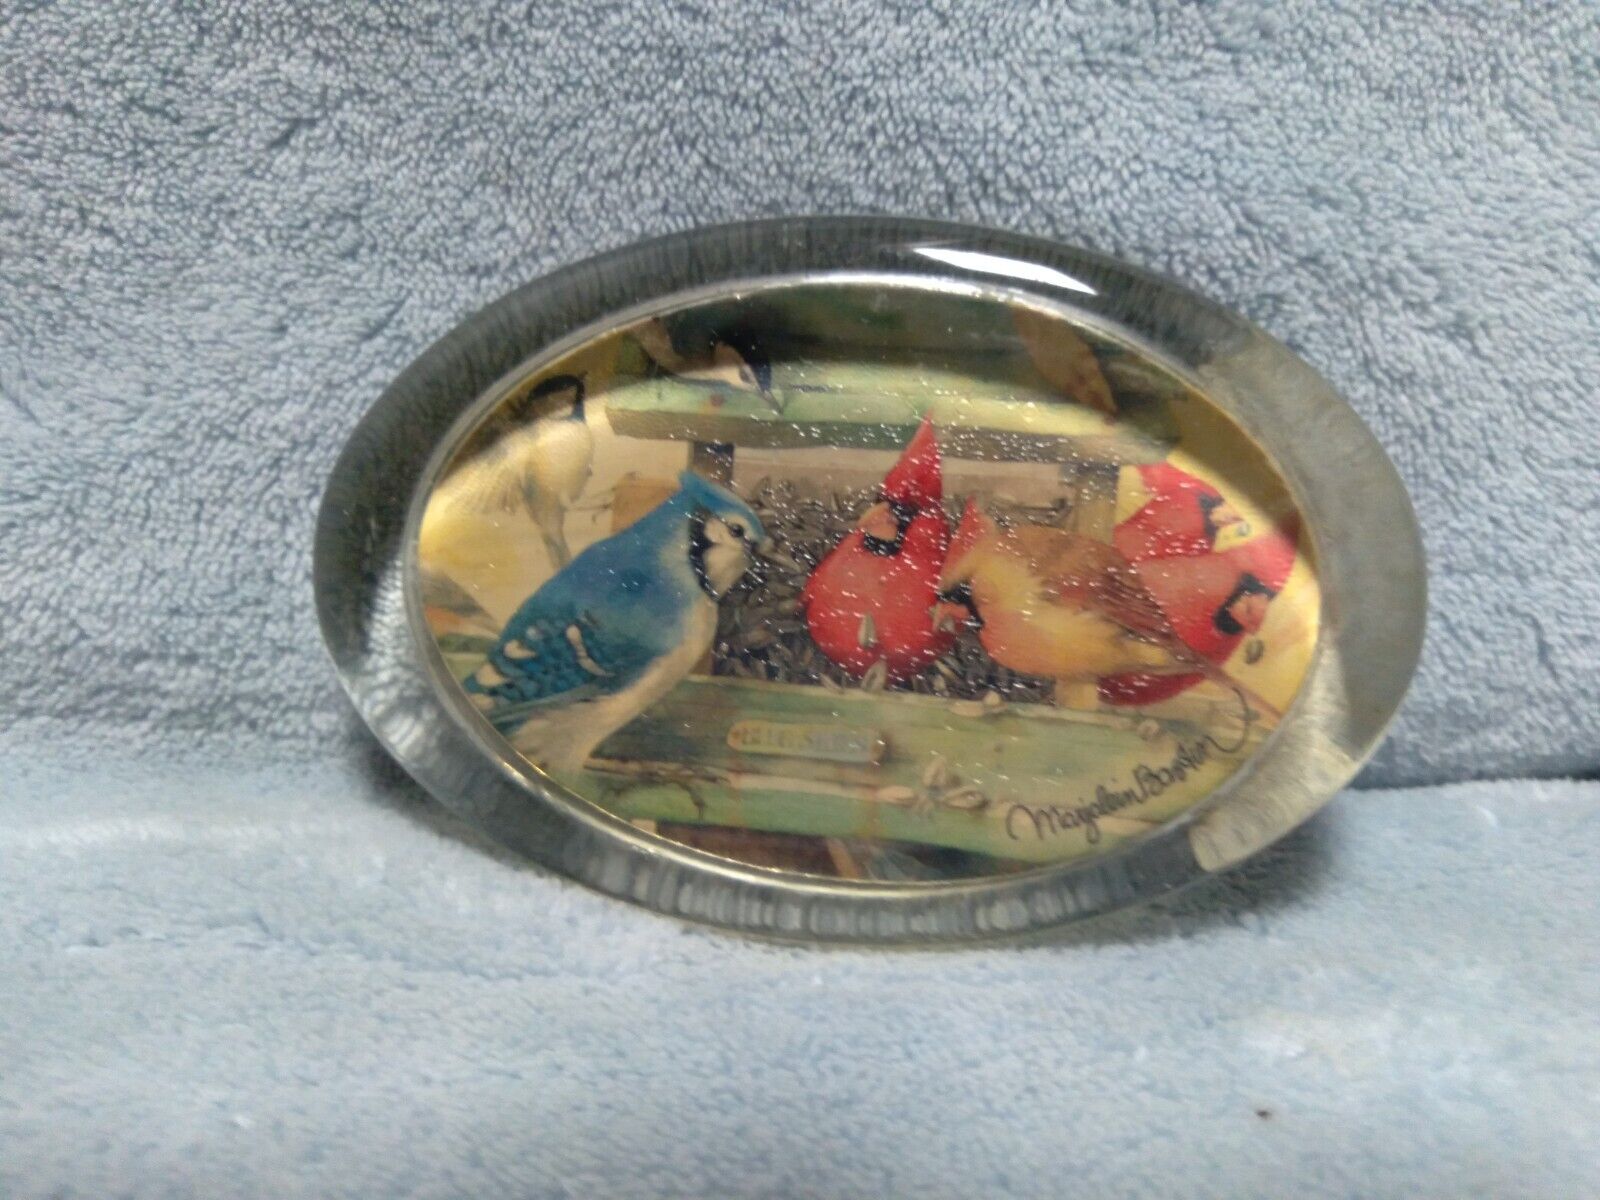 Marjolein Bastin Glass Magnifier Paperweight Blue jays and Cardinals at feeder